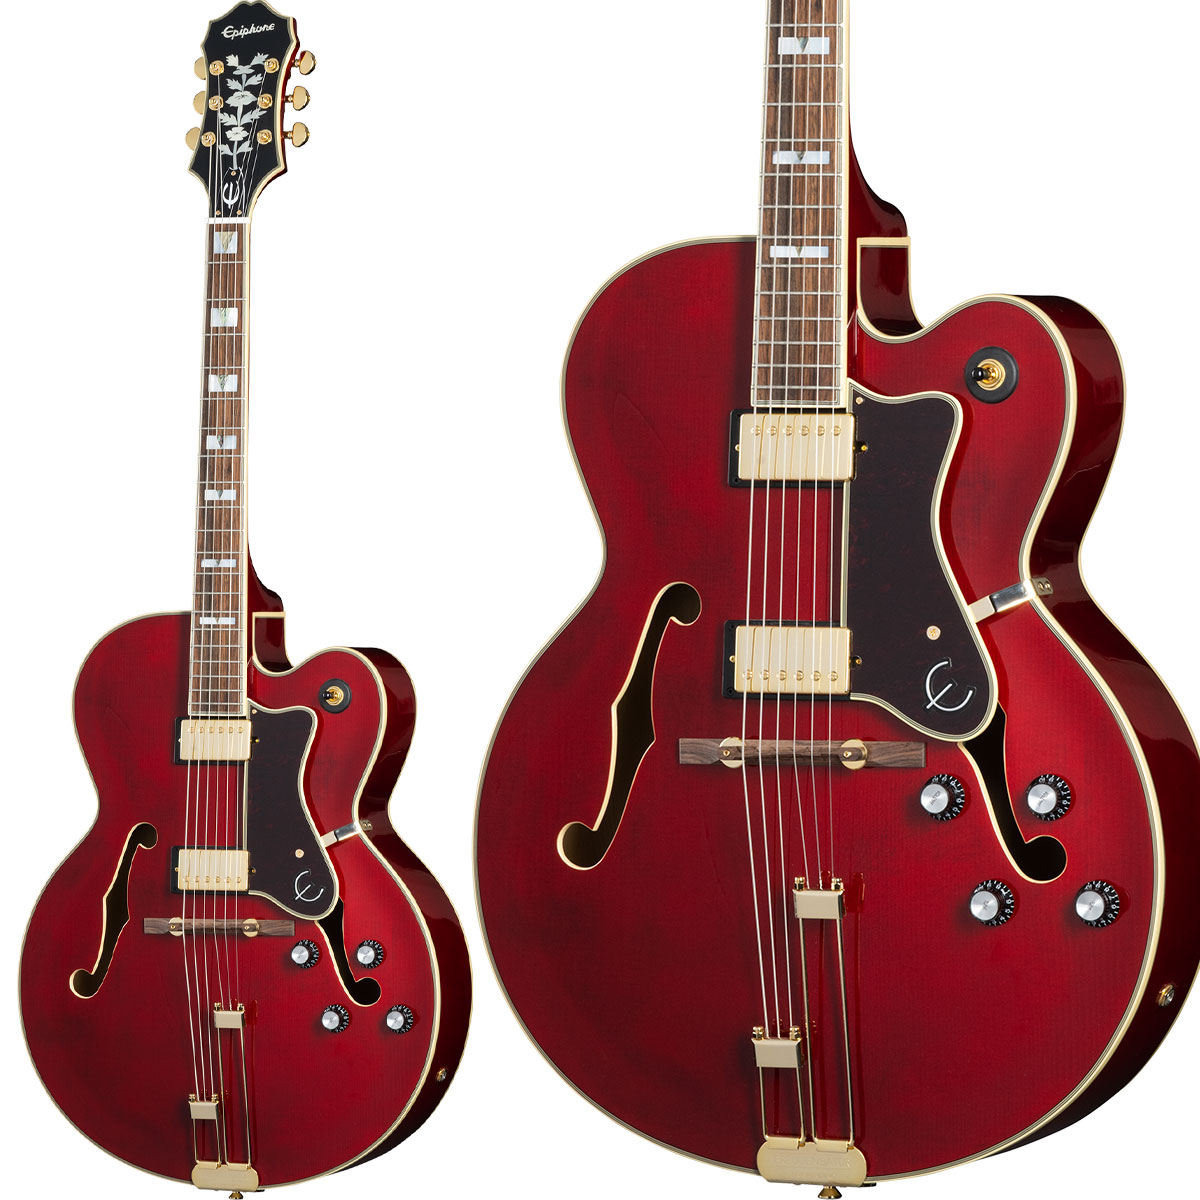 Epiphone Broadway Wine Red エレキギター フルアコ 【 エピフォン